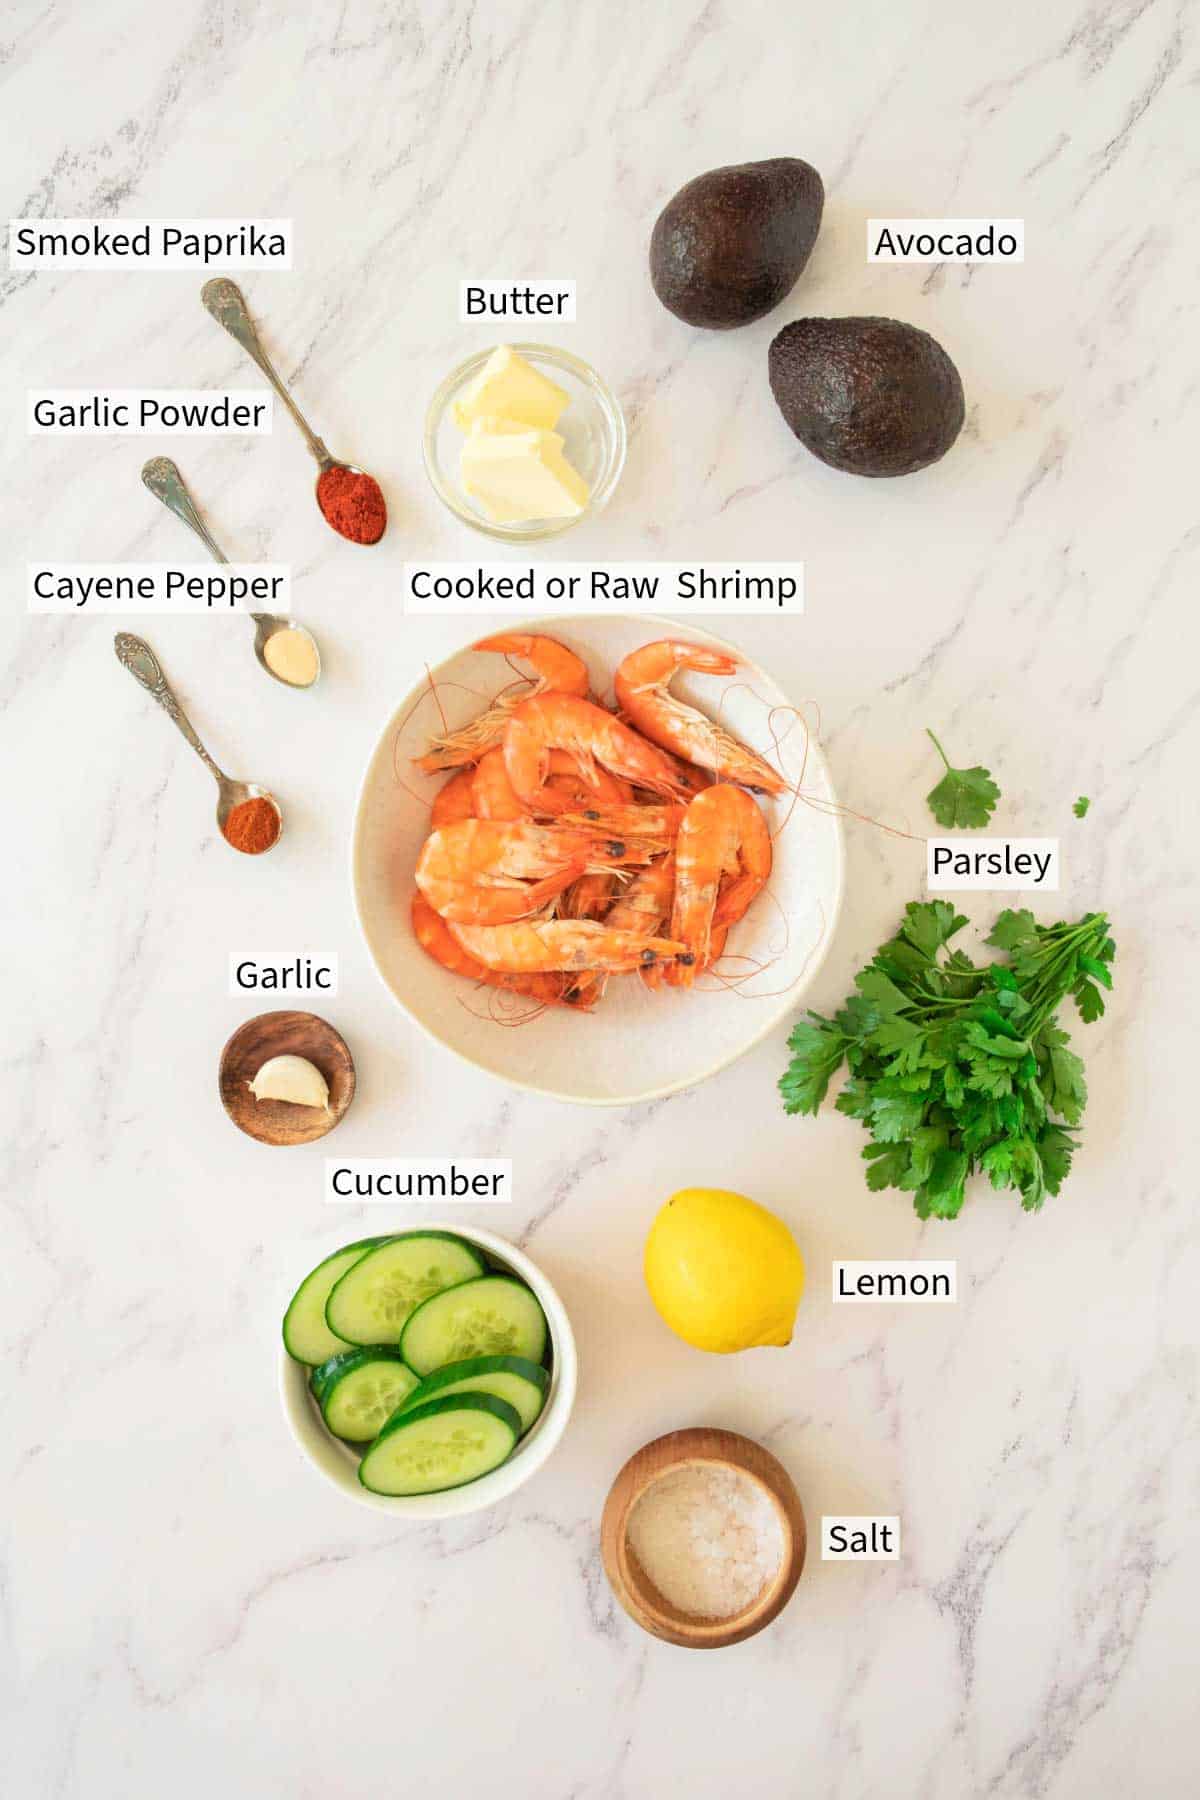 Ingredients laid out on a marble surface include smoked paprika, garlic powder, cayenne pepper, shrimp, butter, avocado, parsley, garlic, cucumber, lemon, and salt.